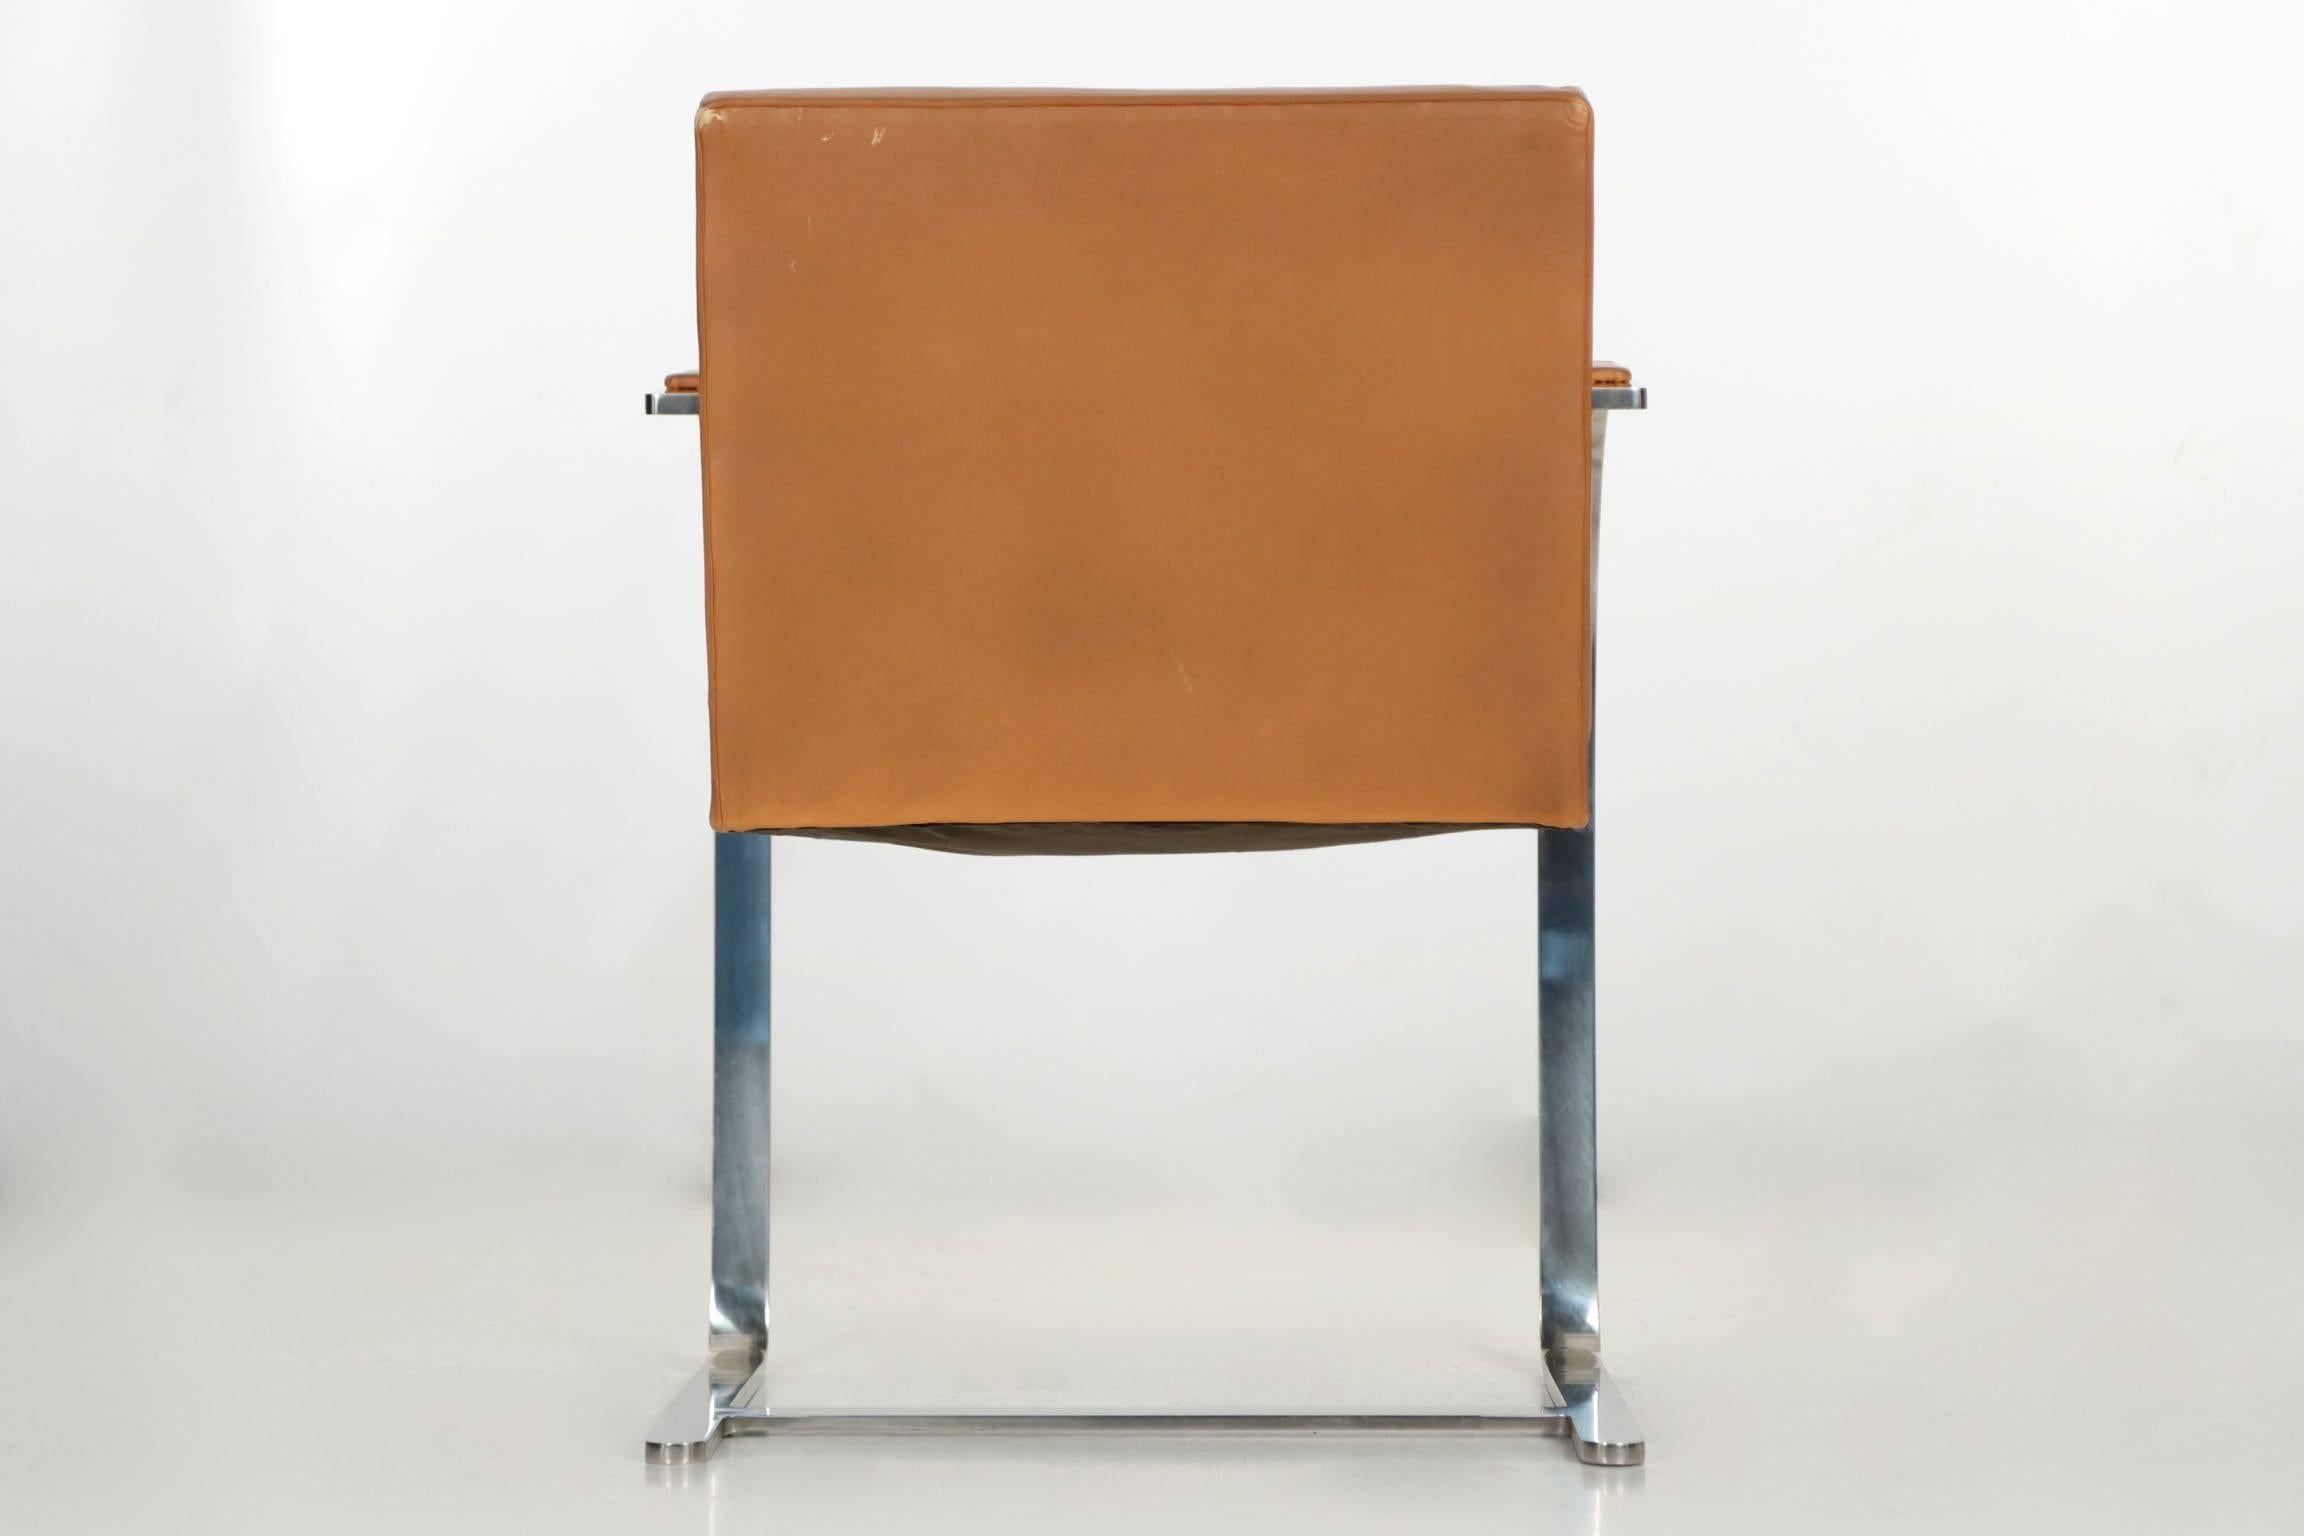 American Modern Leather and Steel Brno Lounge Armchair by Mies van der Rohe for Knoll